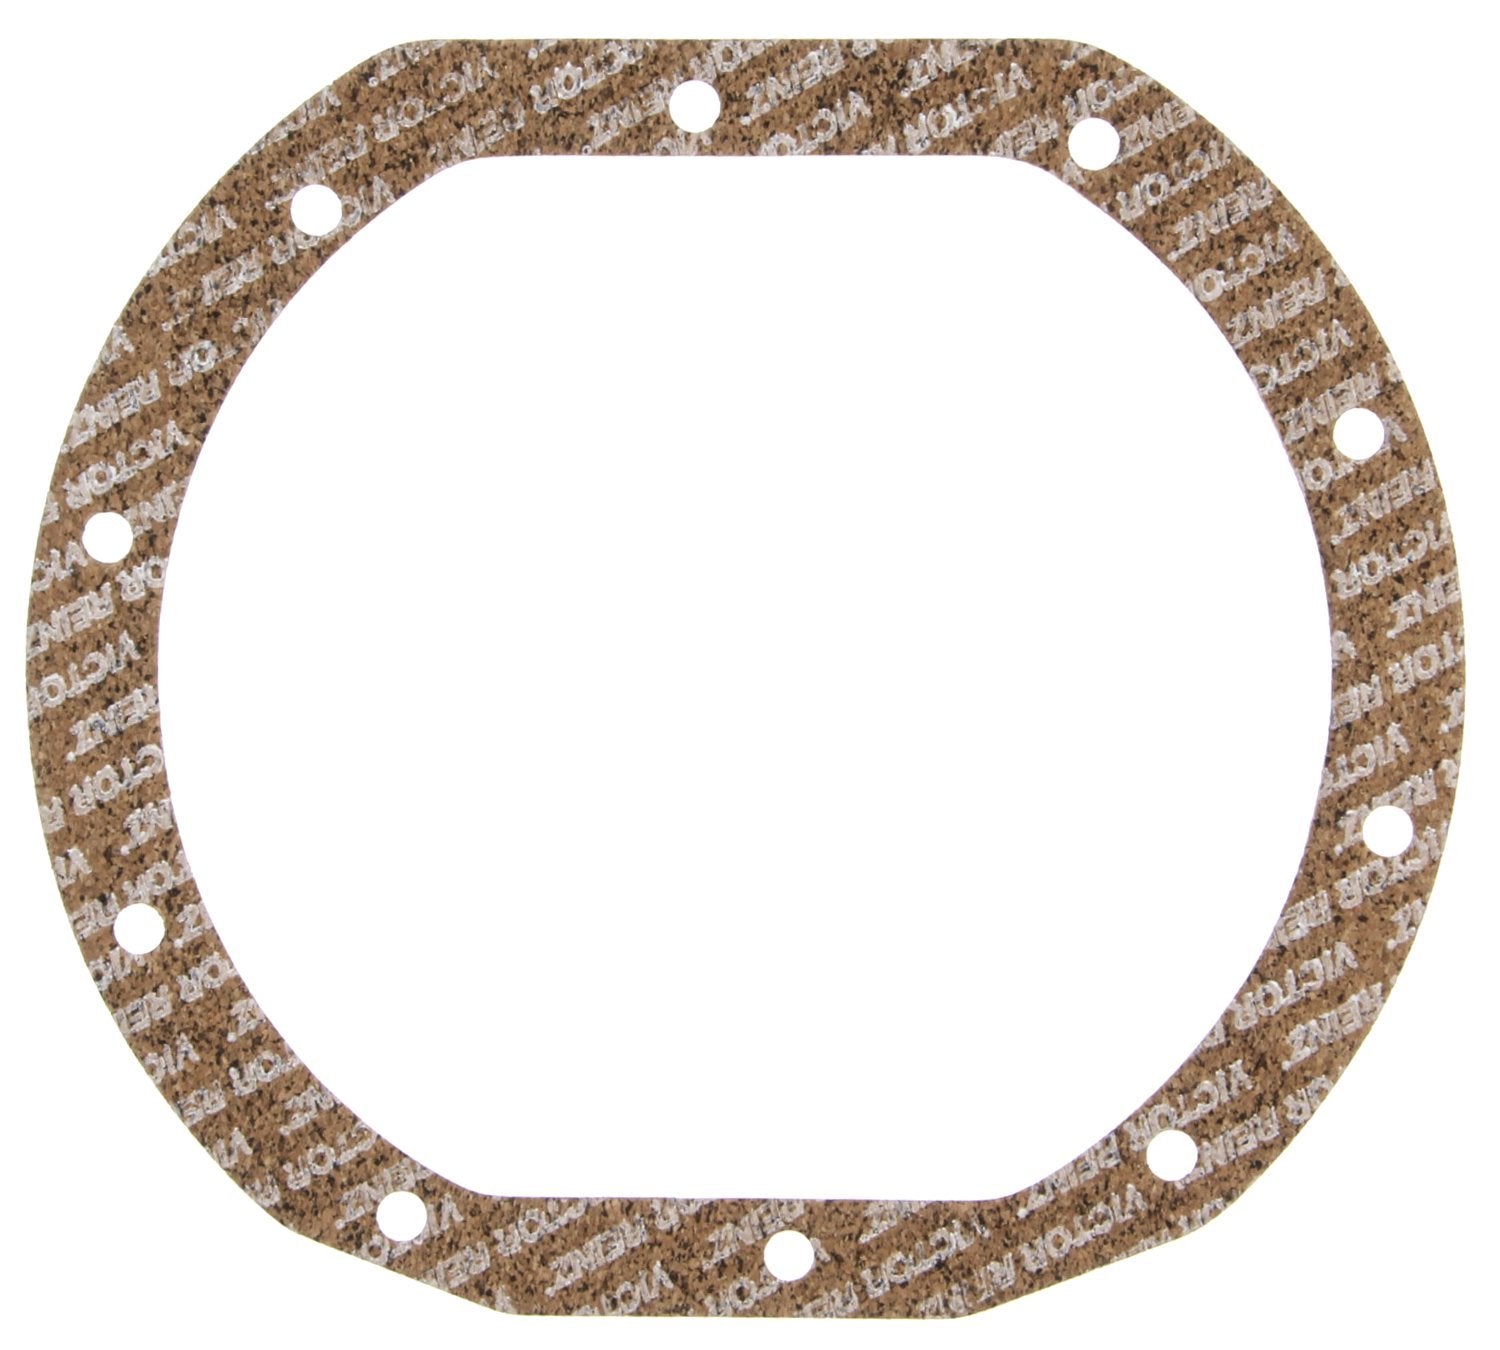 MAHLE Axle Housing Cover Gasket P27139TC